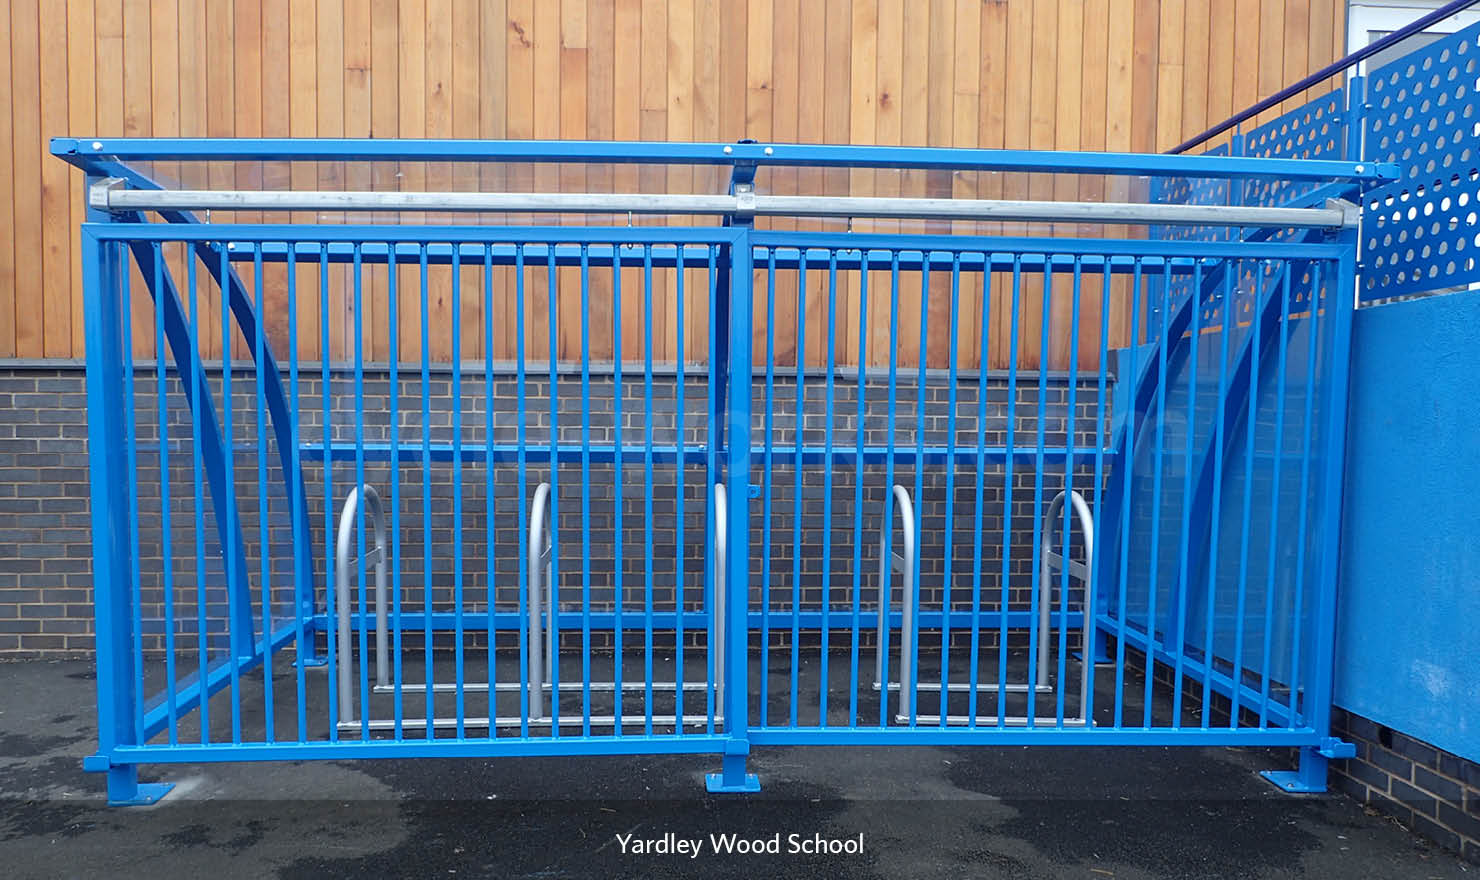 Solent Bike Shelter Installed with Rounded A Racks